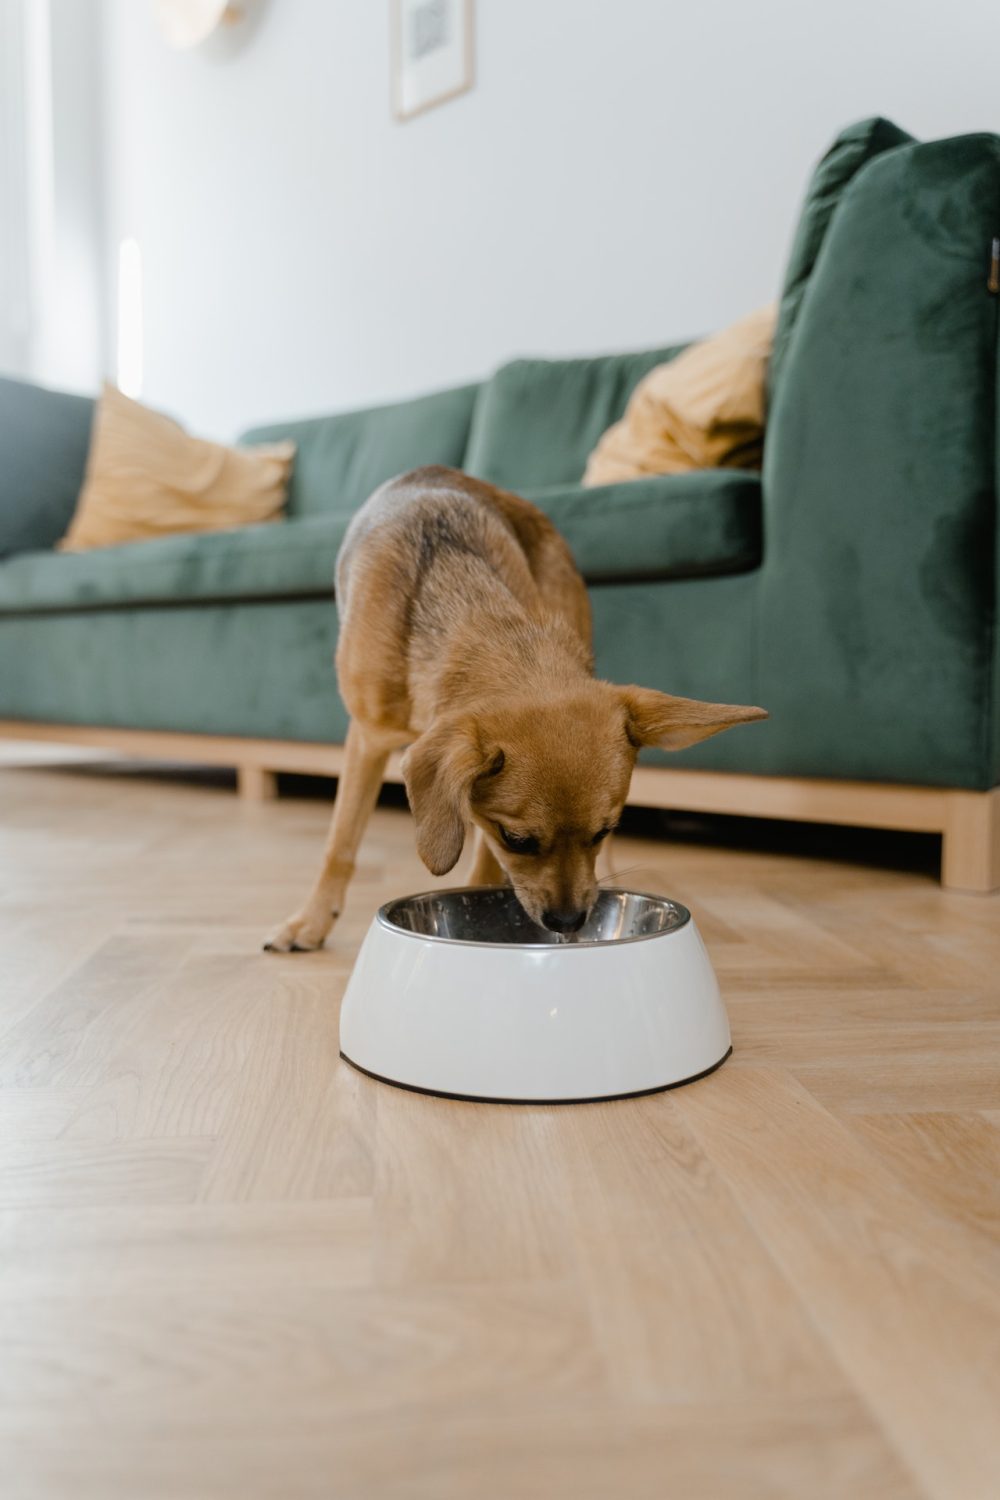 The Rise of Online Shopping for Pet Food and Its Impact on Pet Owners